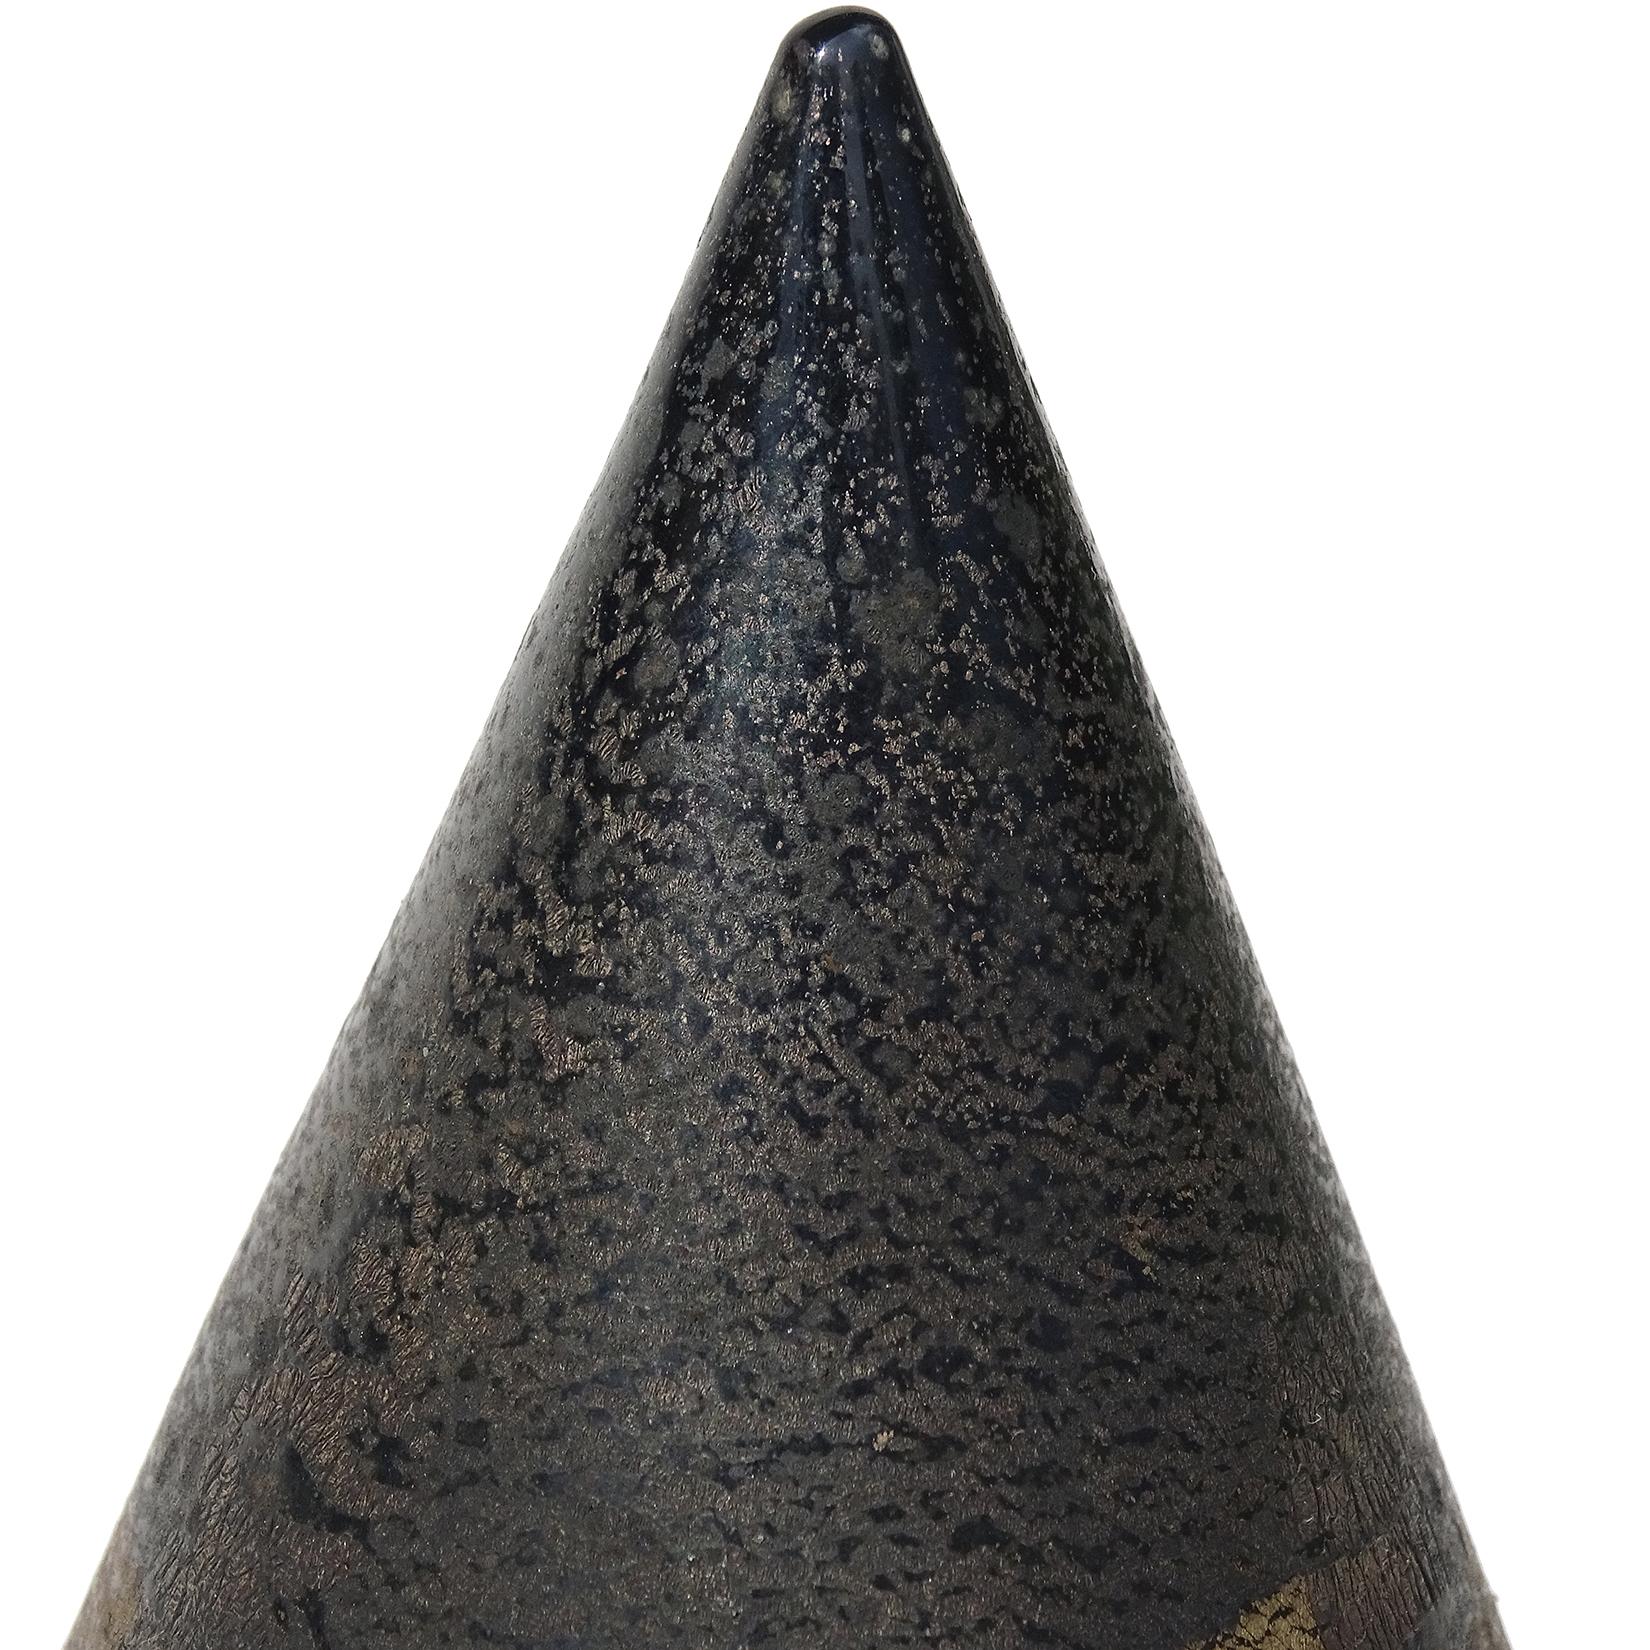 Beautiful vintage Murano hand blown black and gold Italian art glass cone pyramid paperweight. It has a white and black lettering label, reading 